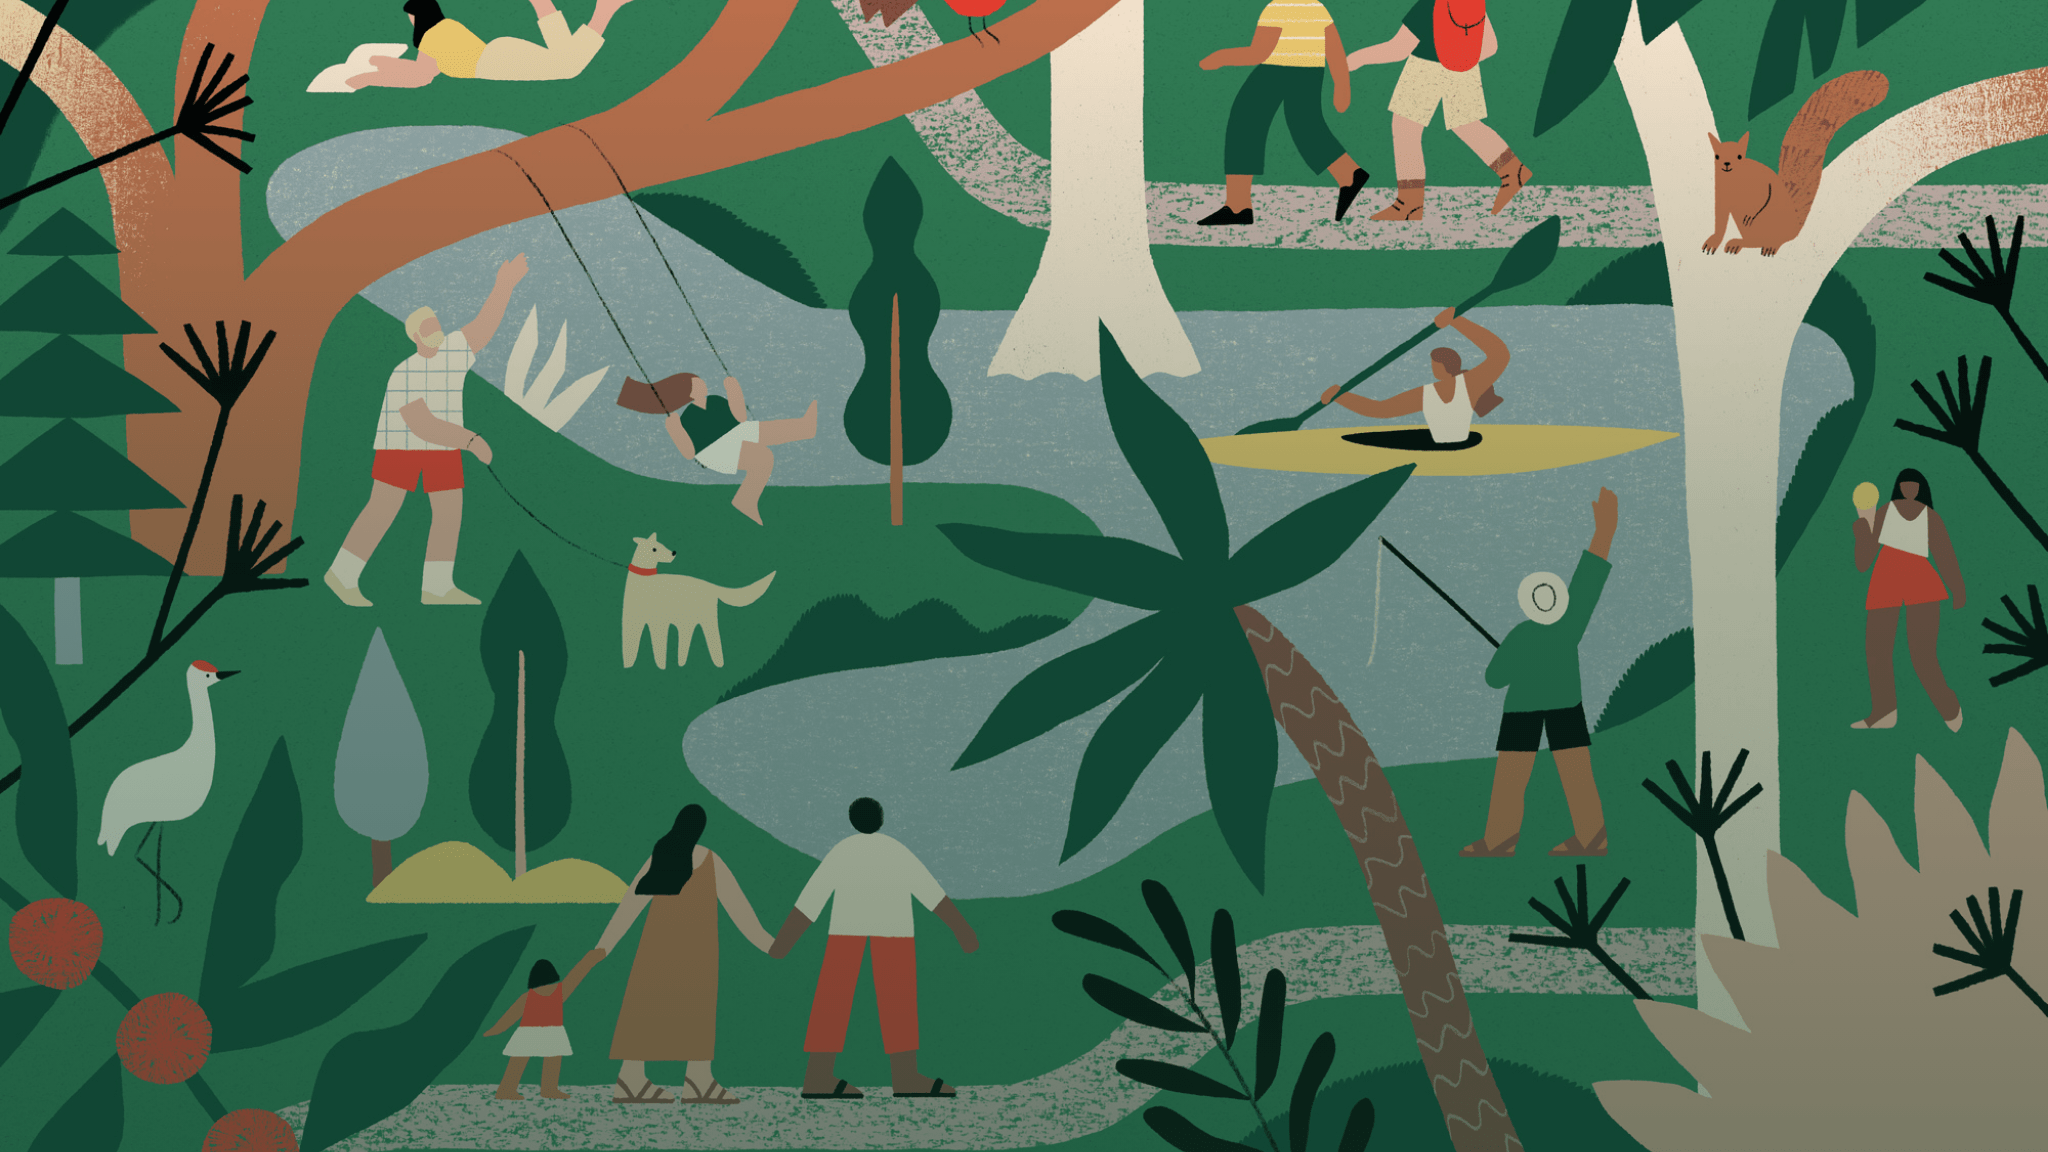 An illustration of a scene depicting people interacting with nature